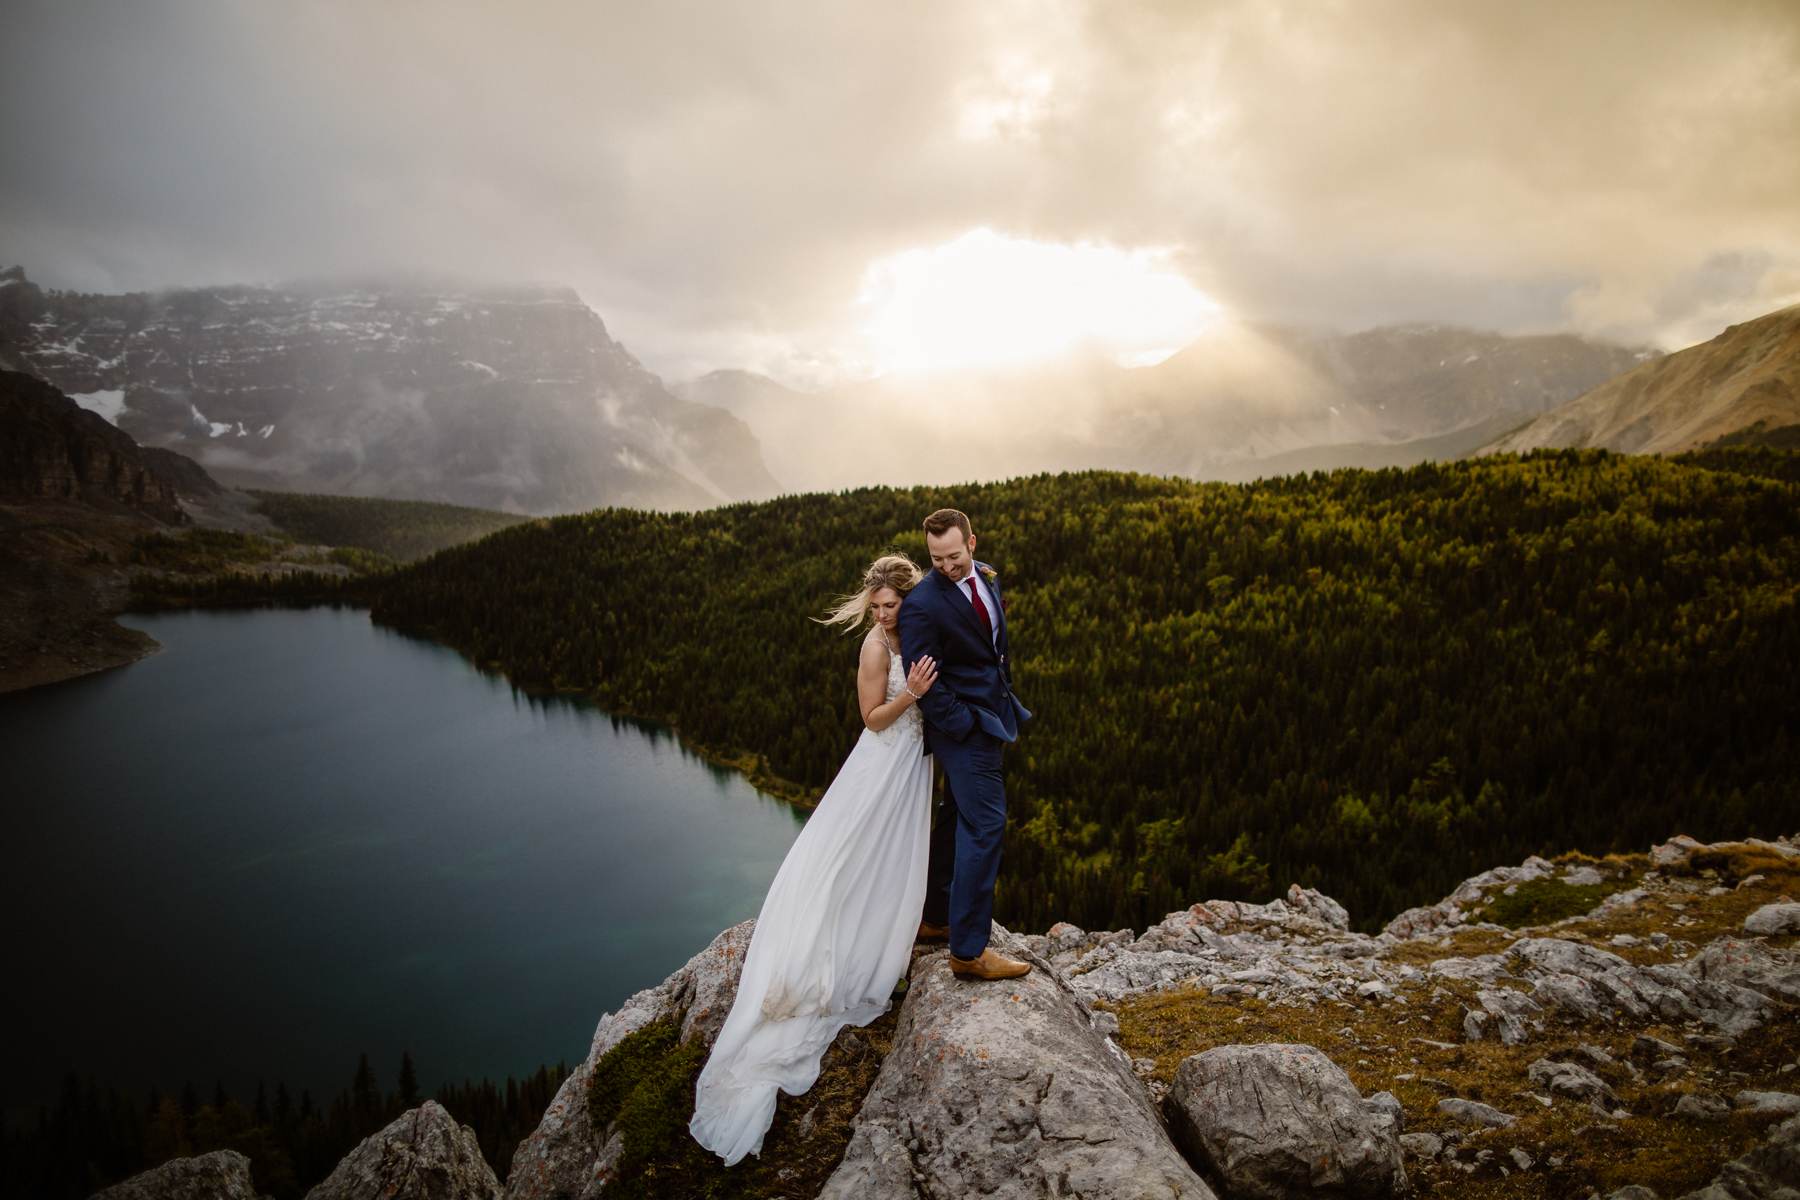 Mount Assiniboine Elopement Photographers at a Backcountry Lodge - Photo 31